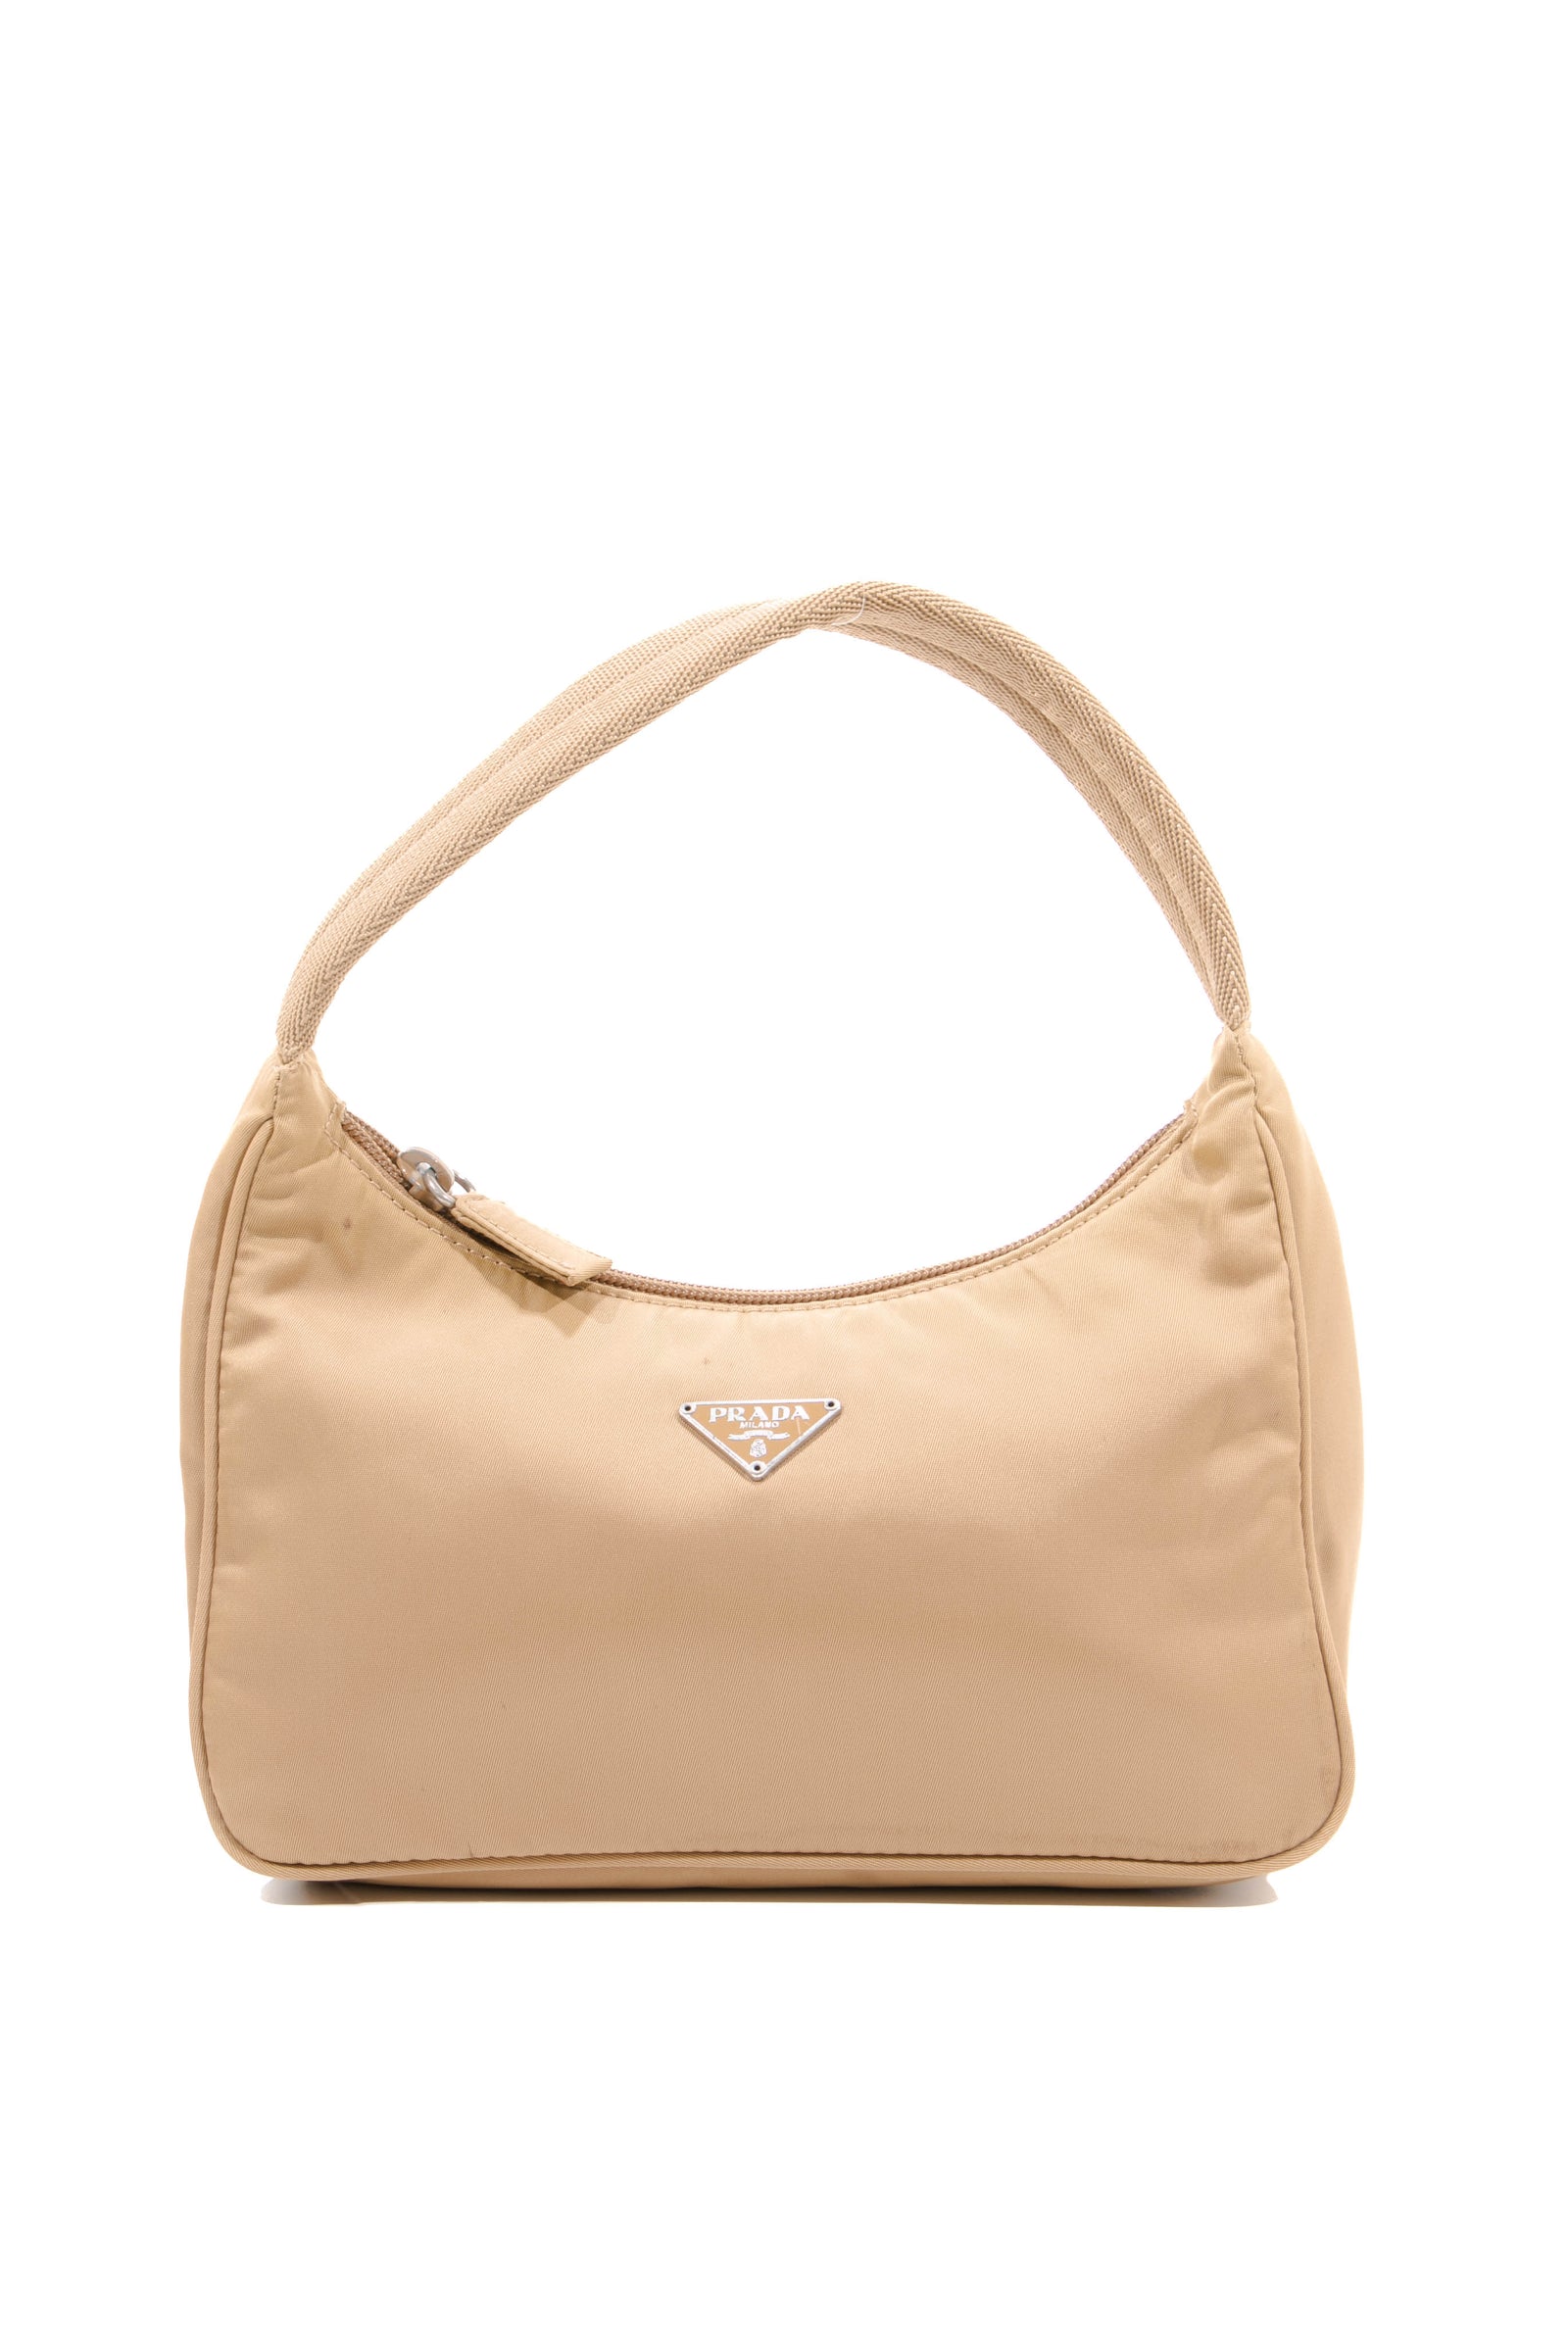 Chanel Gabrielle Small Hobo Bag in Light Beige Distressed Calfskin